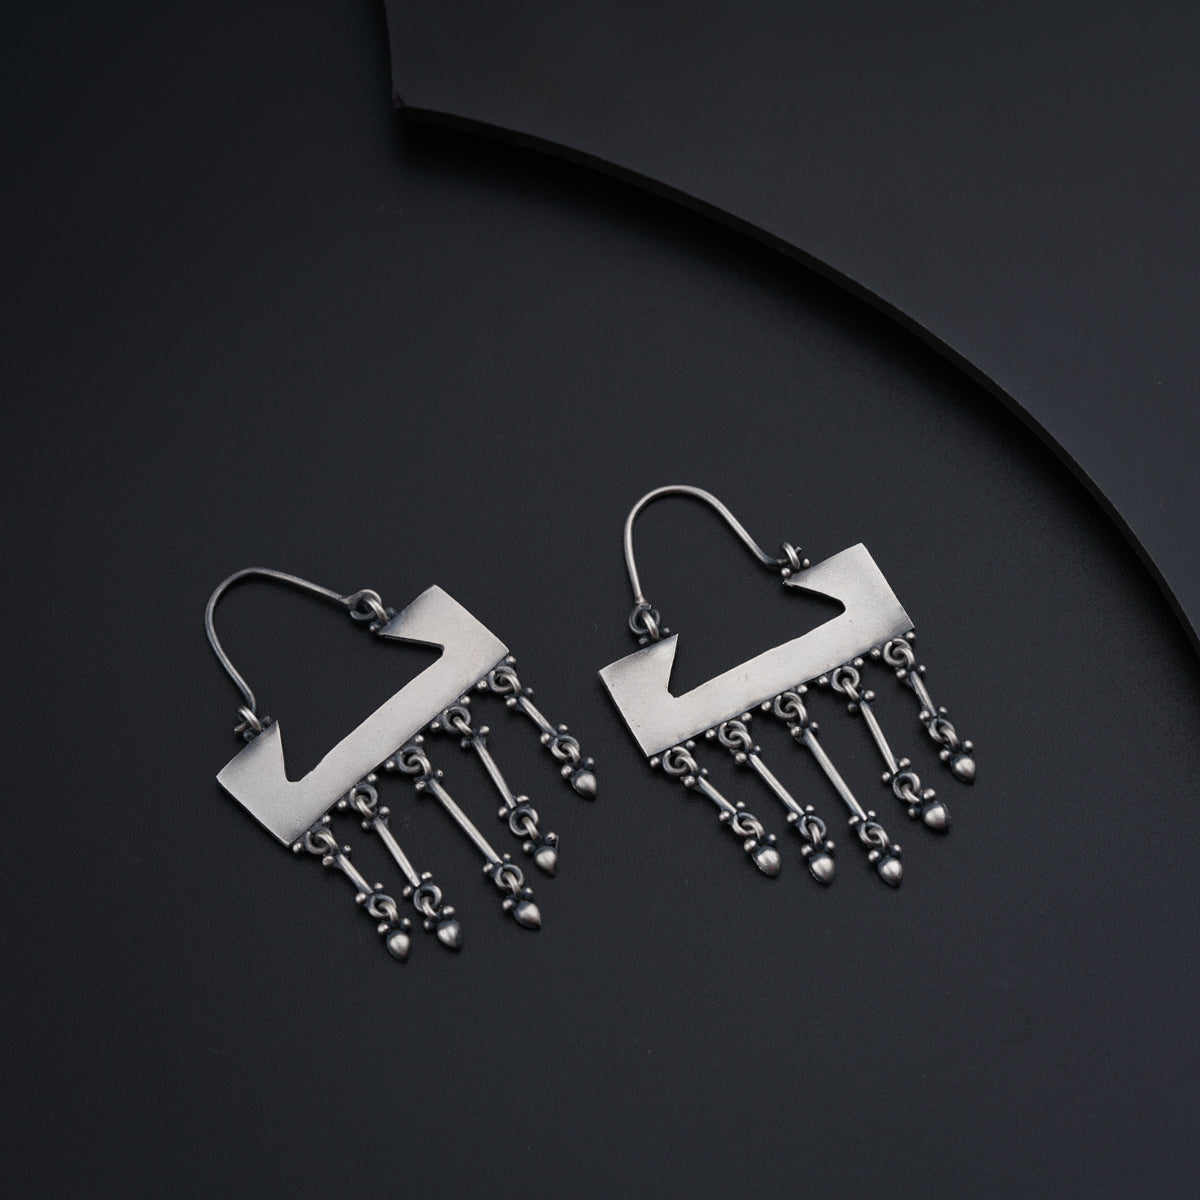 a pair of silver earrings with dangling beads